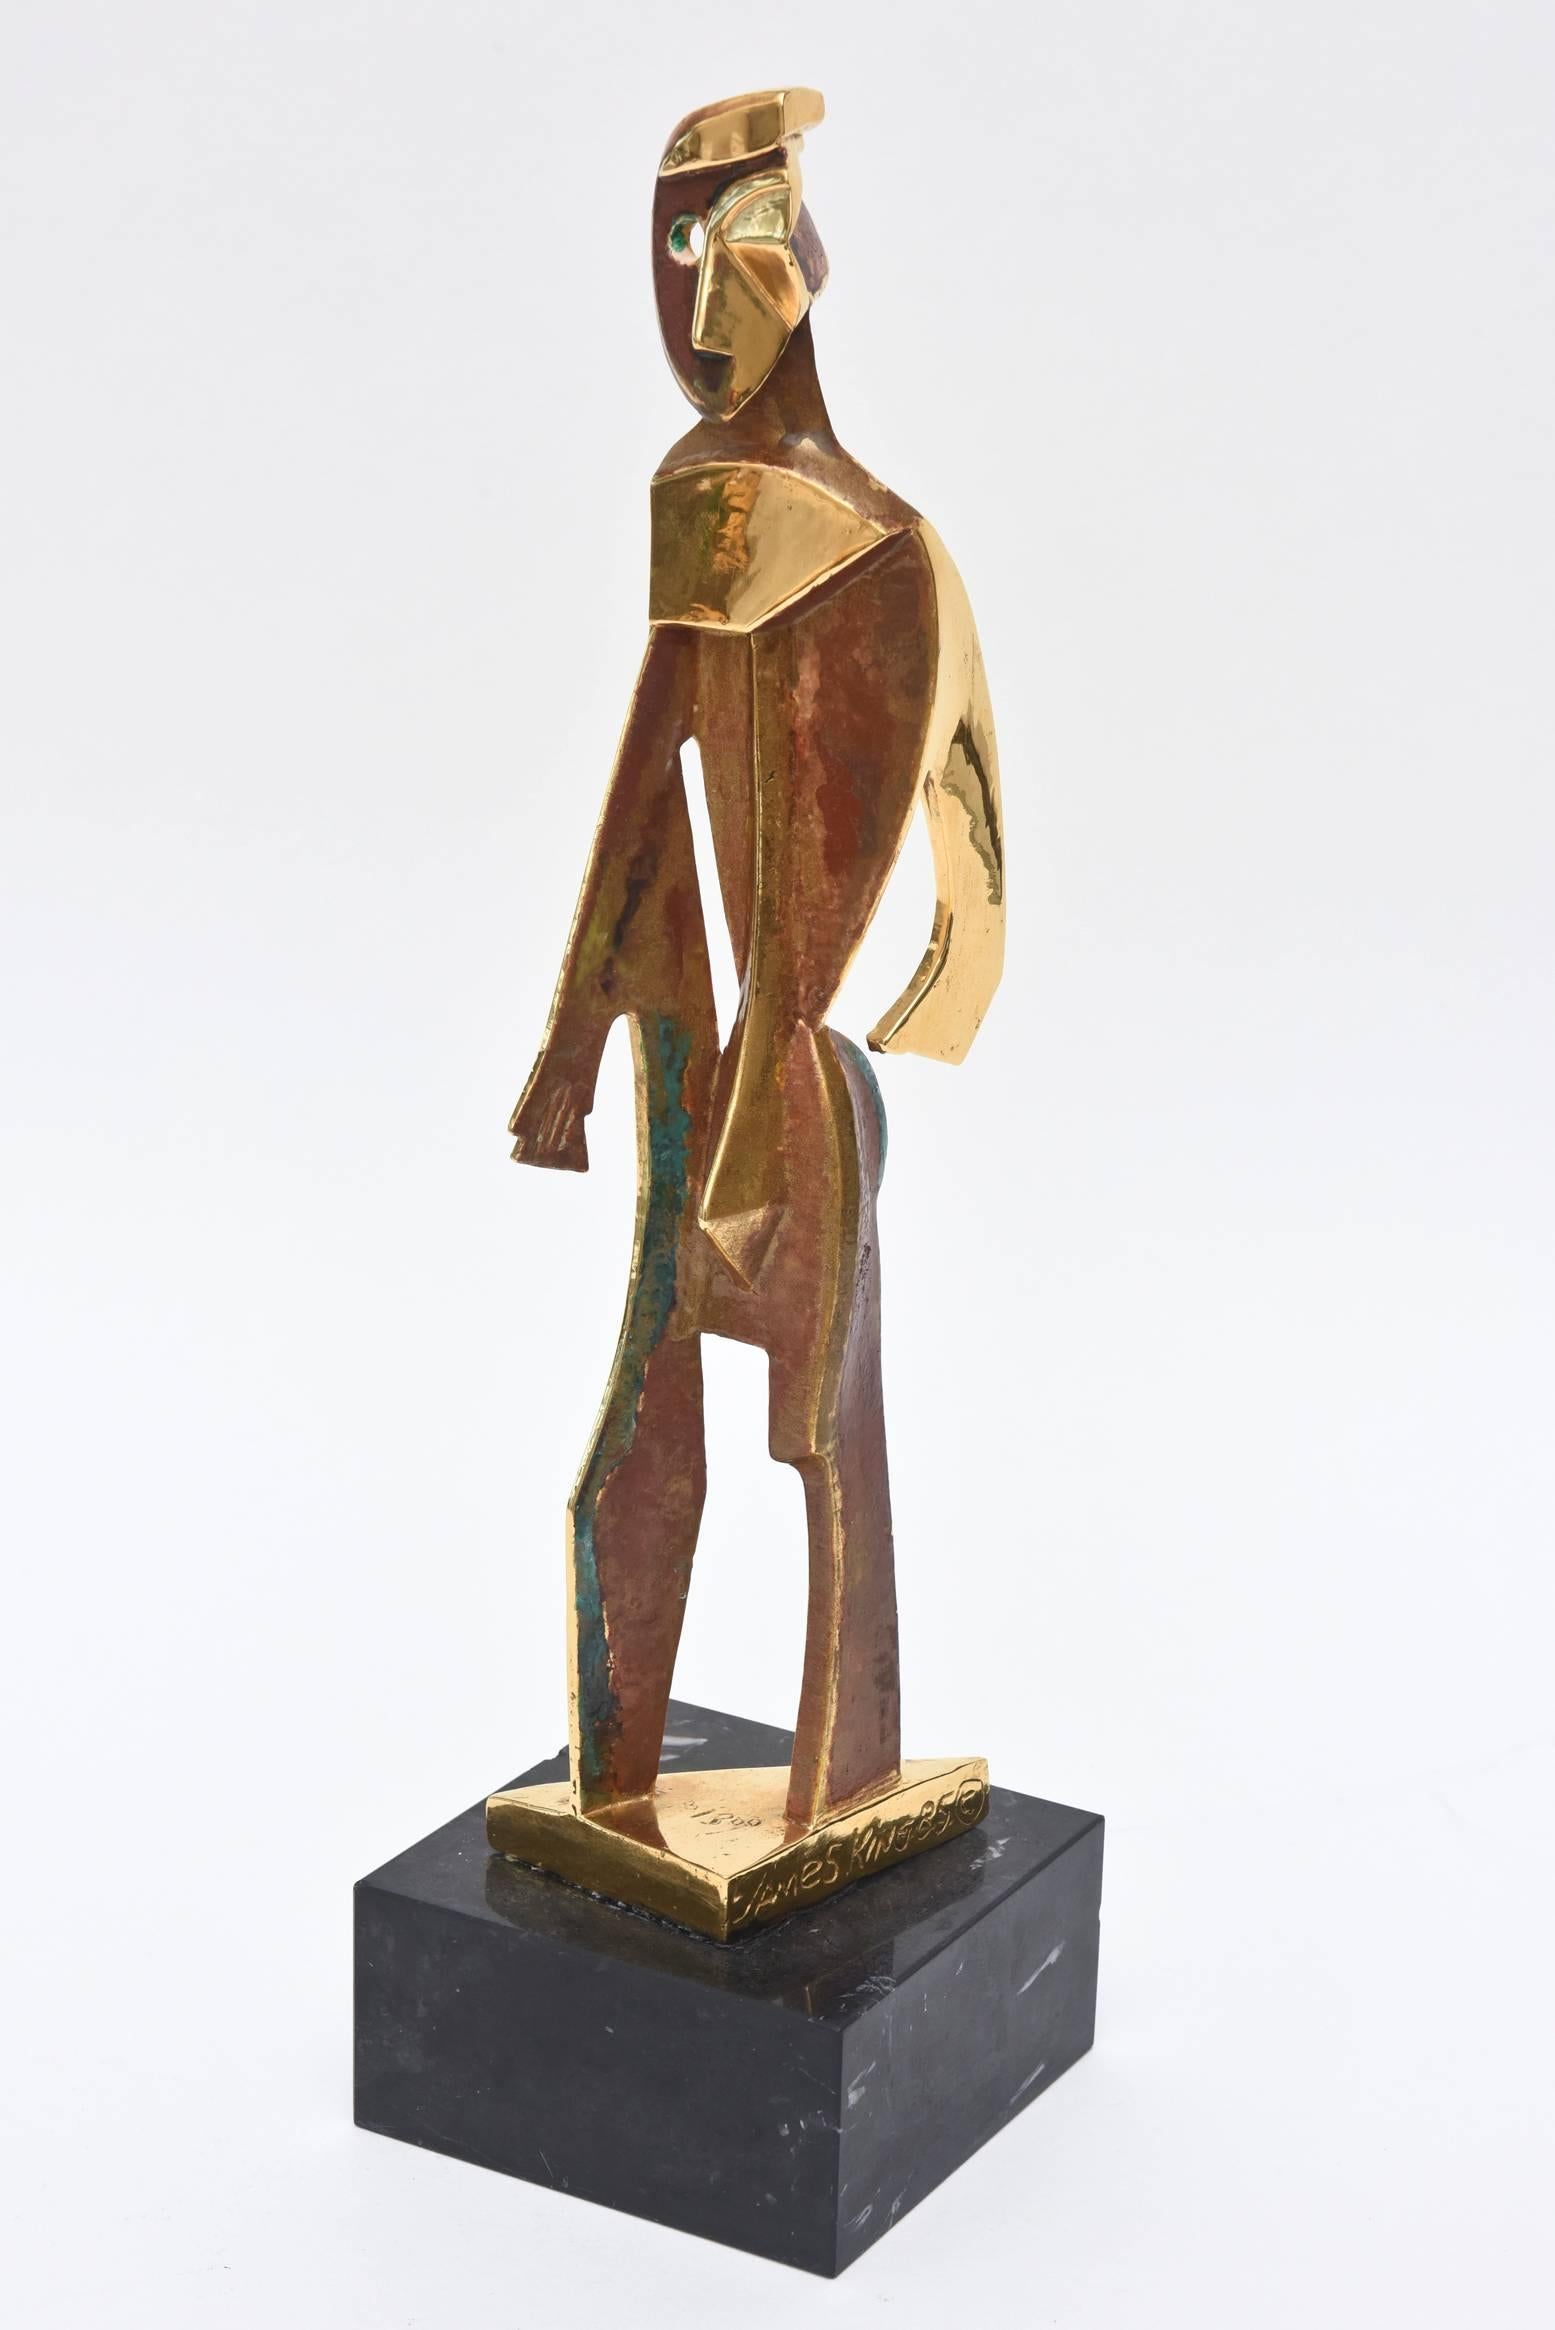 This arresting cubist sculpture is signed James King and is entitled